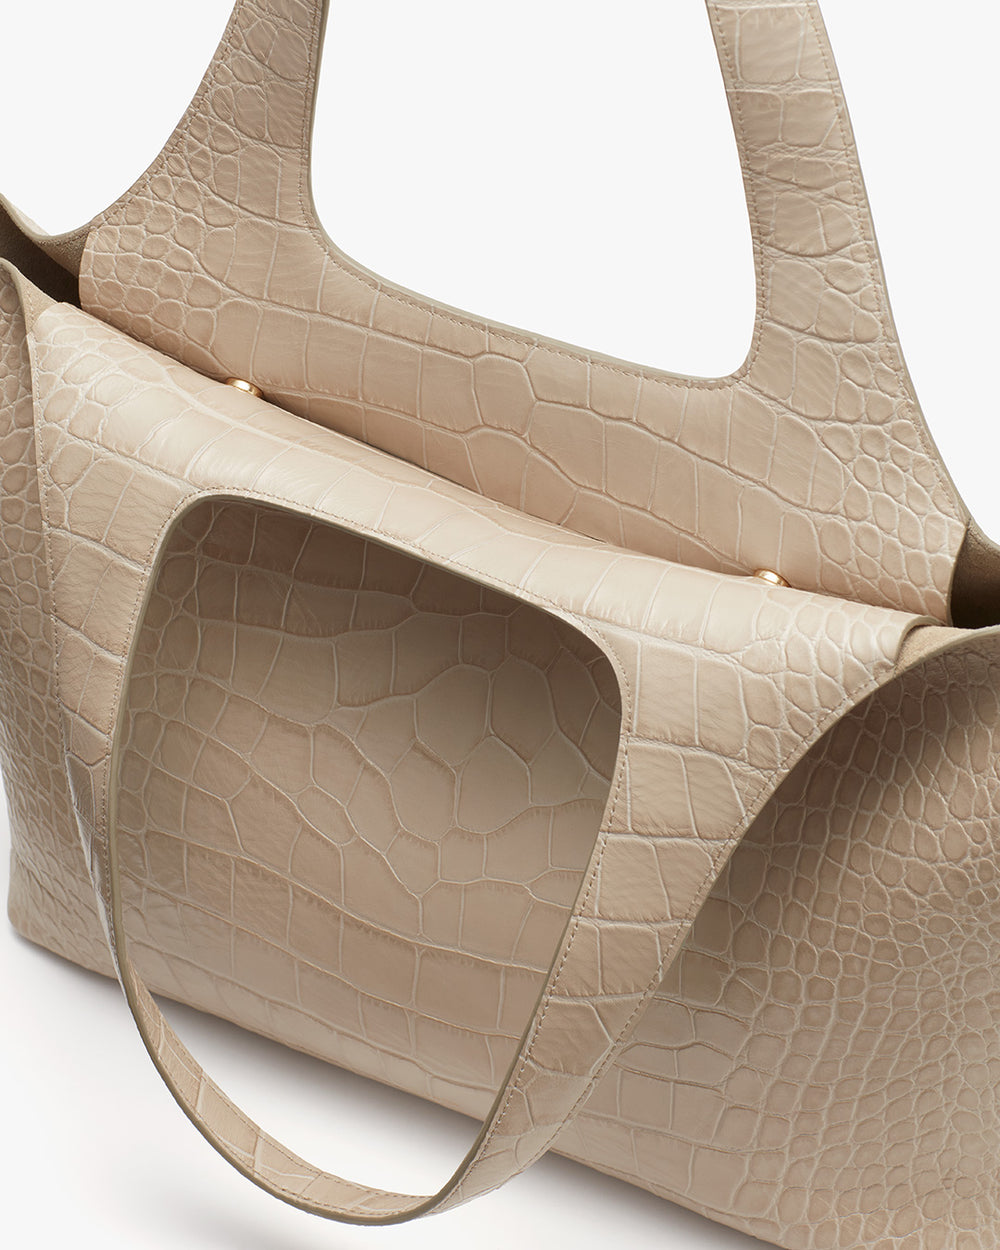 Two textured tote bags with top handles positioned next to each other.